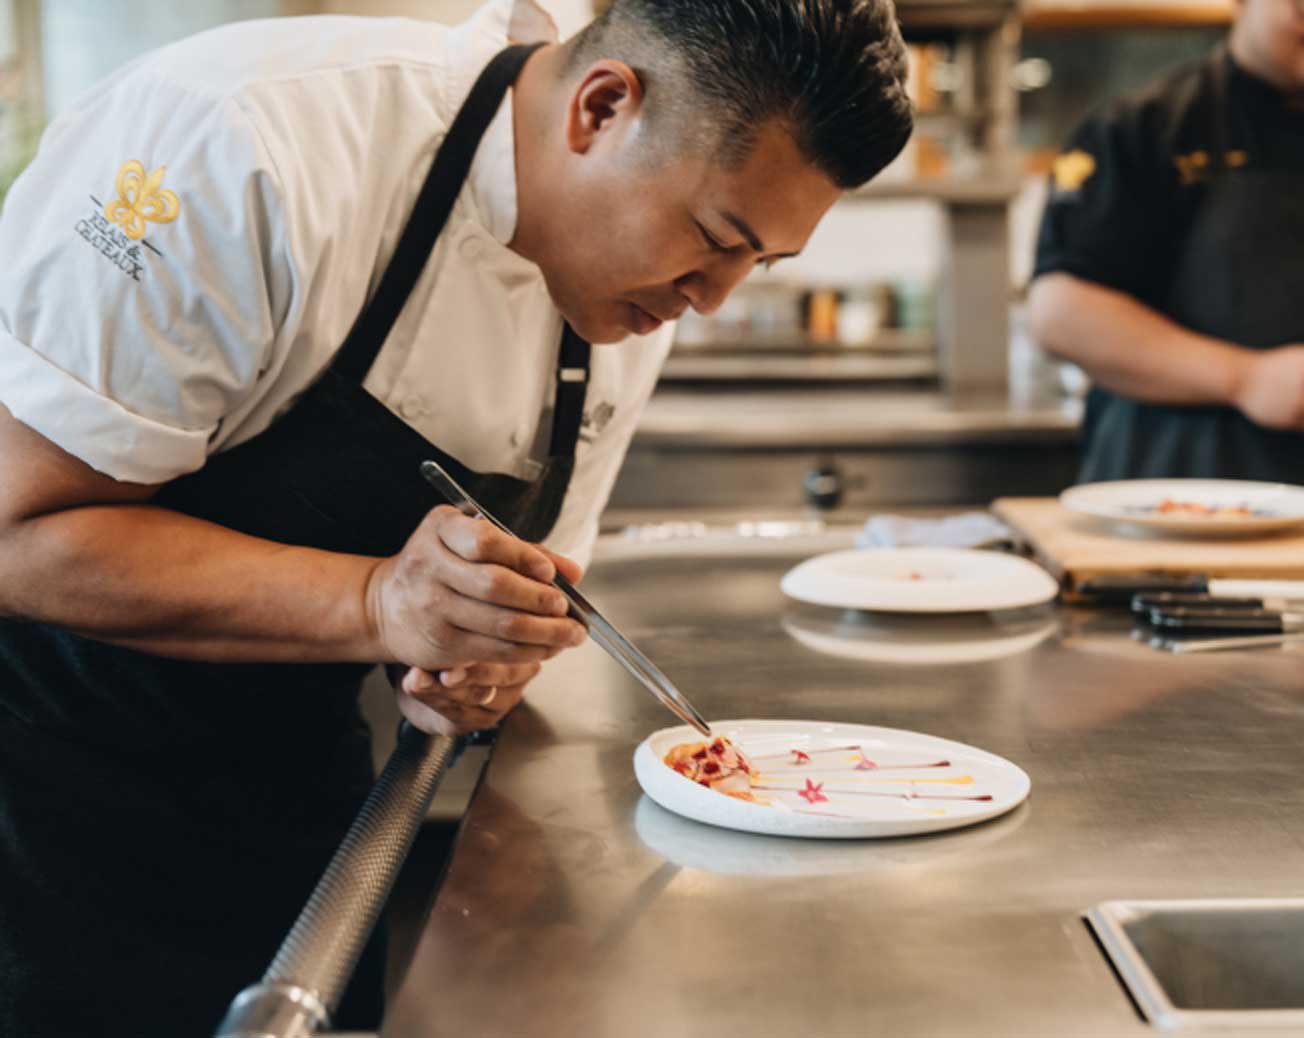 Chef Ryan Cruz Plating a Dish in The Kitchen at The Restaurant